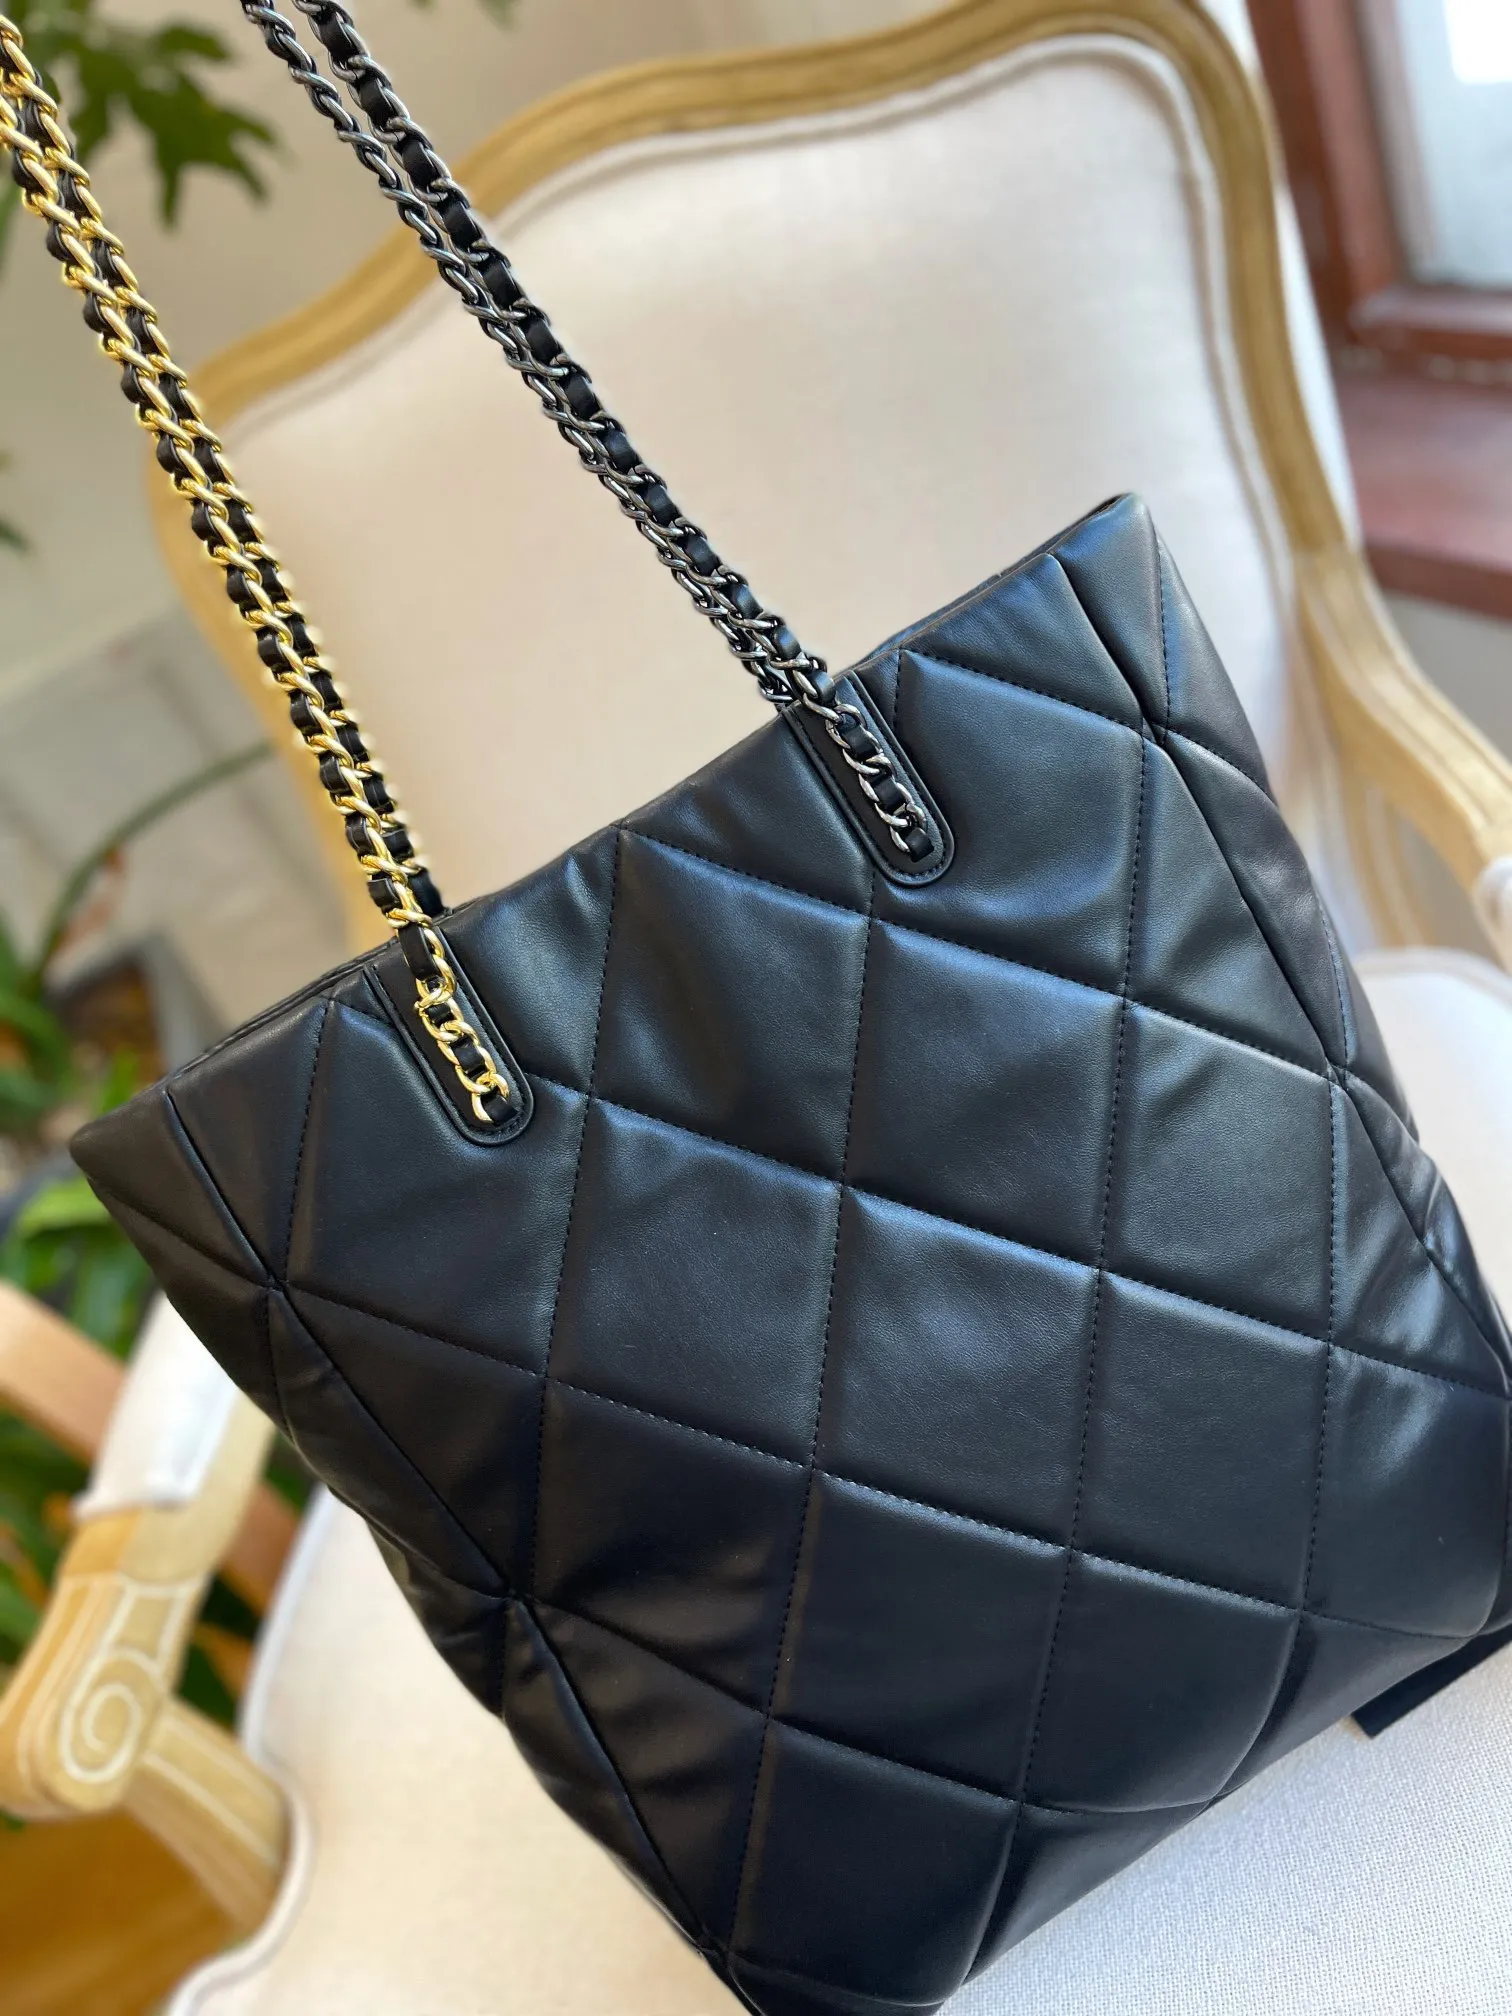 Luxury large the tote bag leather designer handbags Grand Shopping Top Handle Handbag Chain Shoulder Tote Travel CC Turn-lock diamond-quilted Purse Satchels Bag